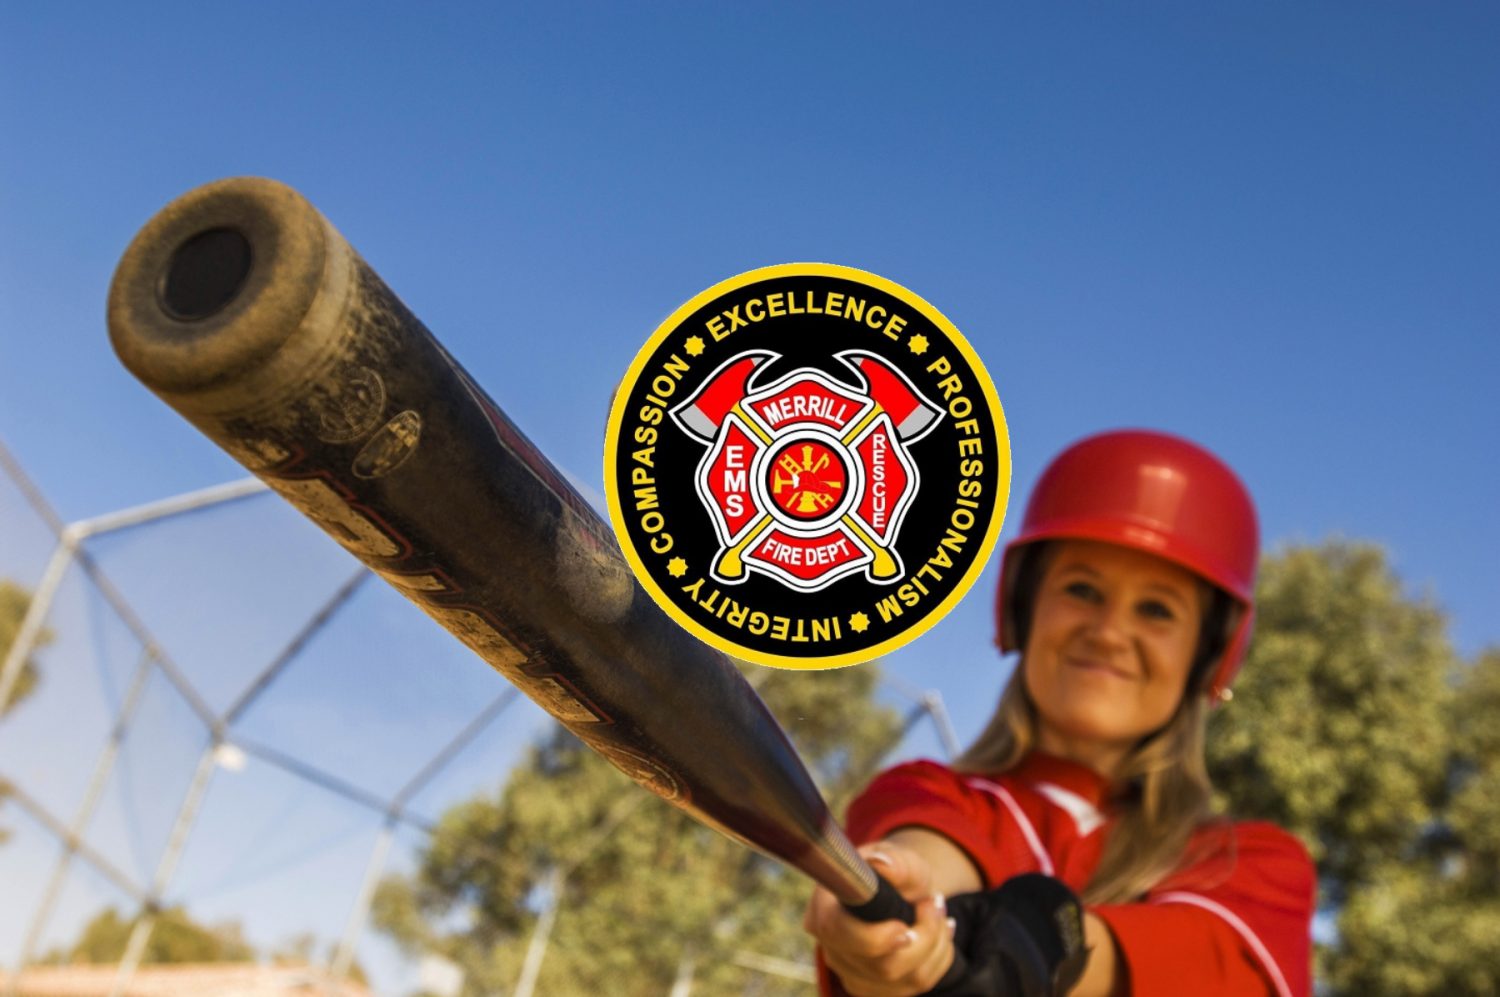 42nd Annual Merrill Firefighters Charities Benefit Softball Tournament set for August 6-8